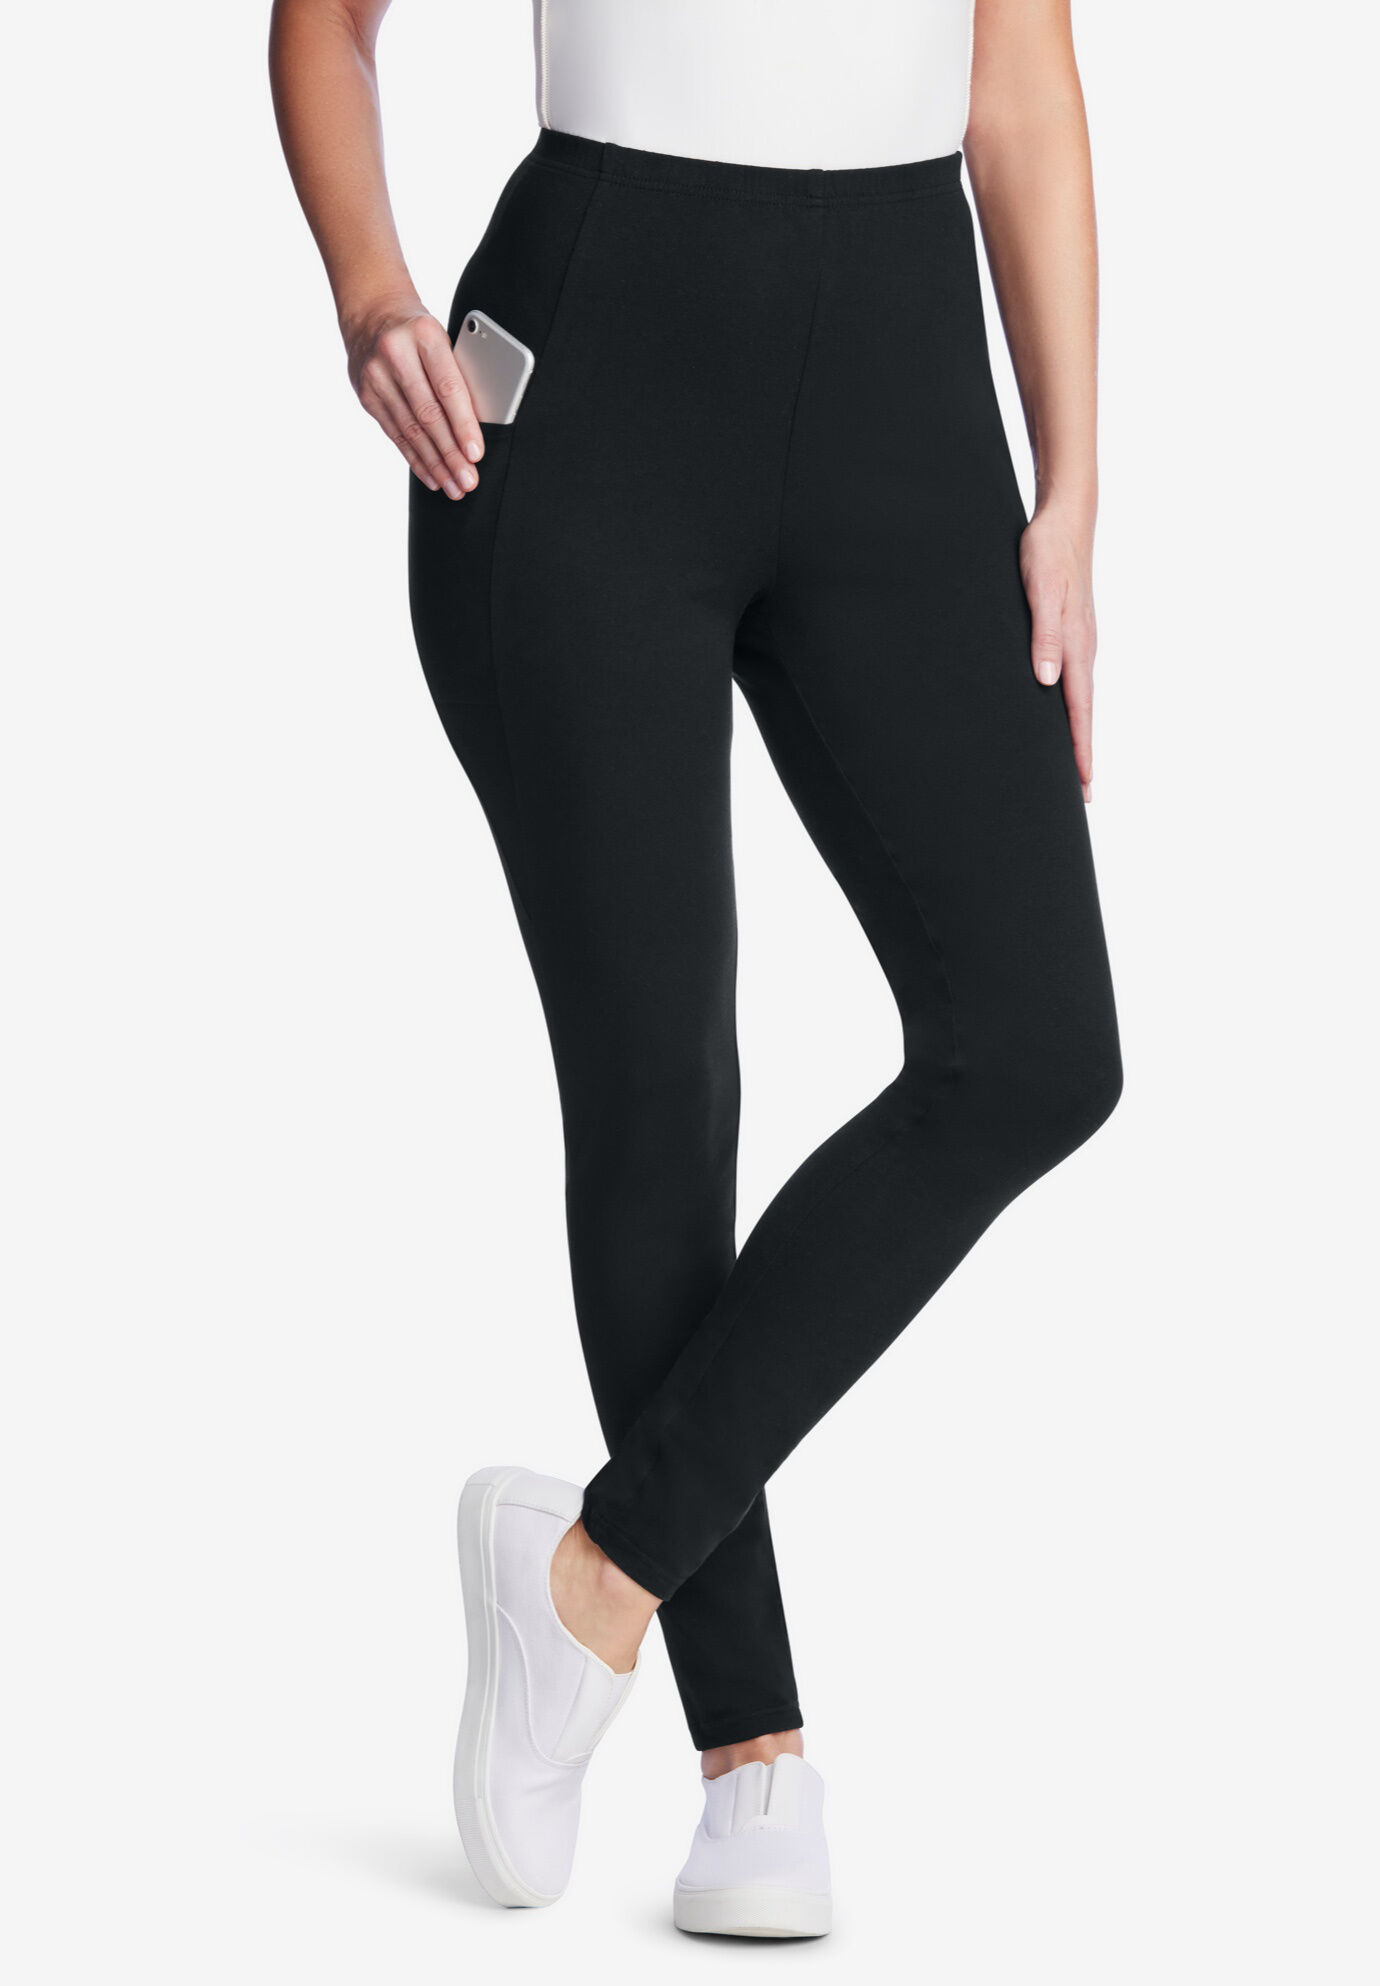 Spin And Spritzers High Waist Active Legging • Impressions Online Boutique